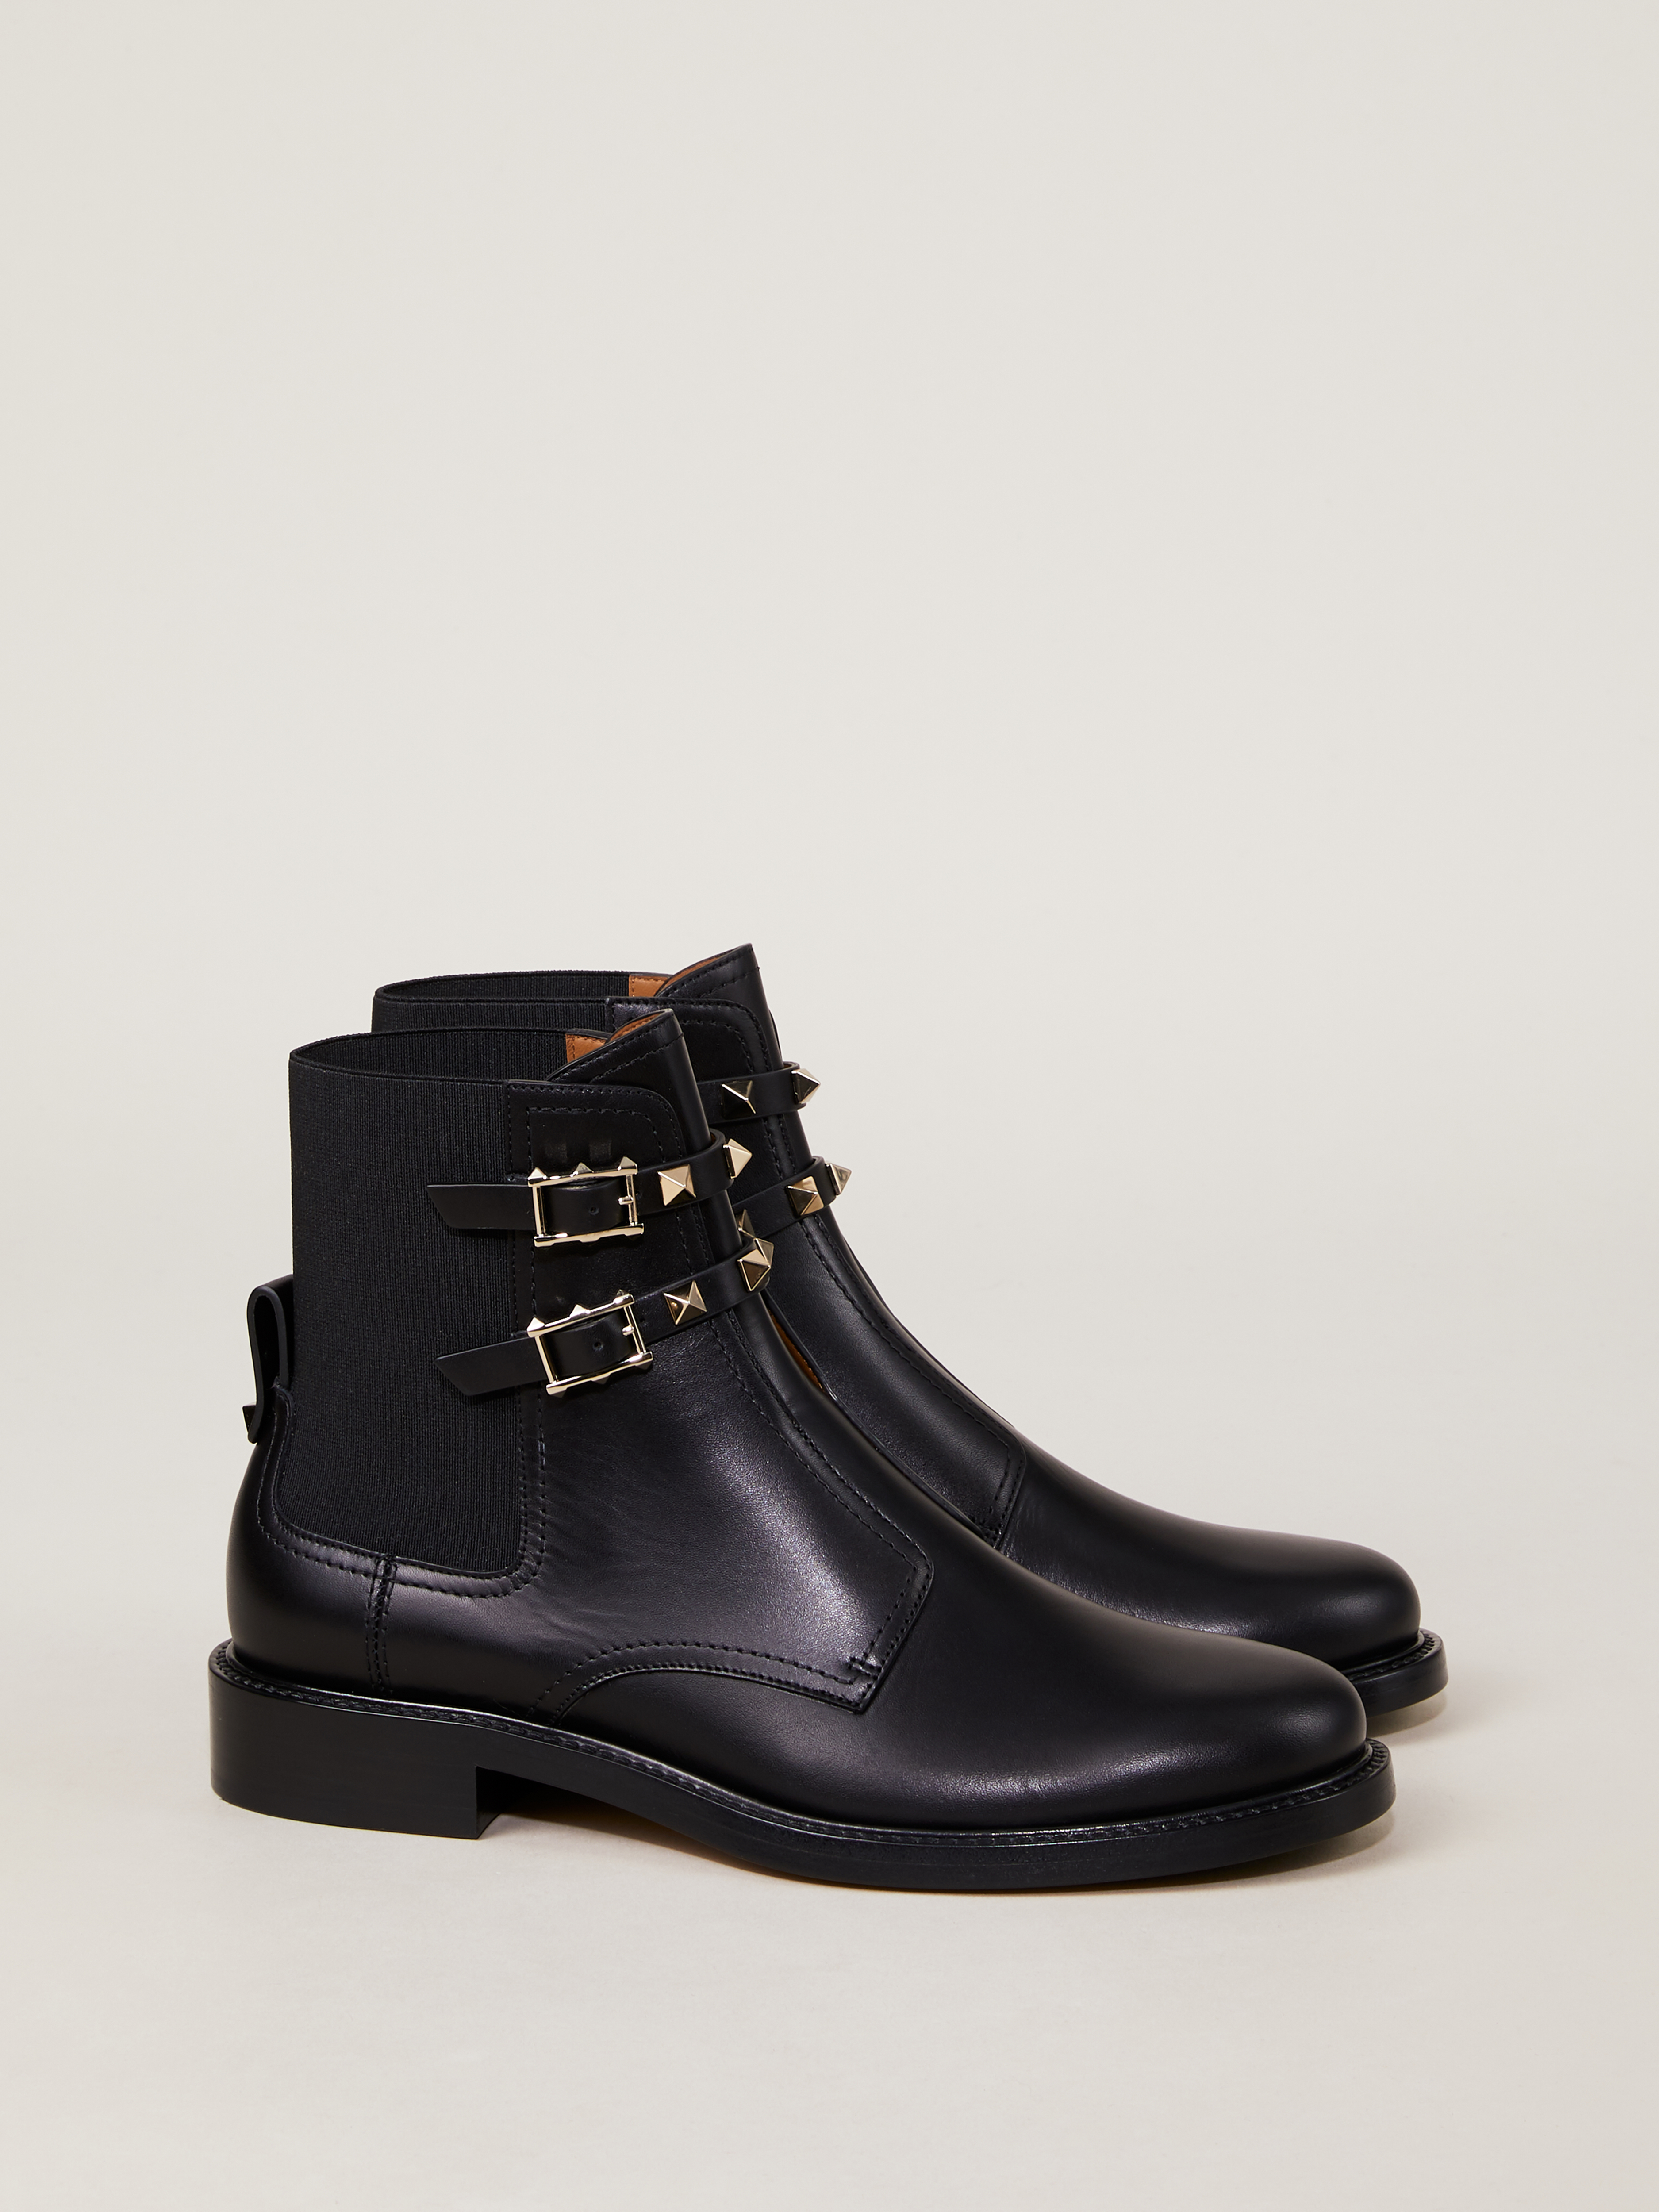 iconic black ankle boots